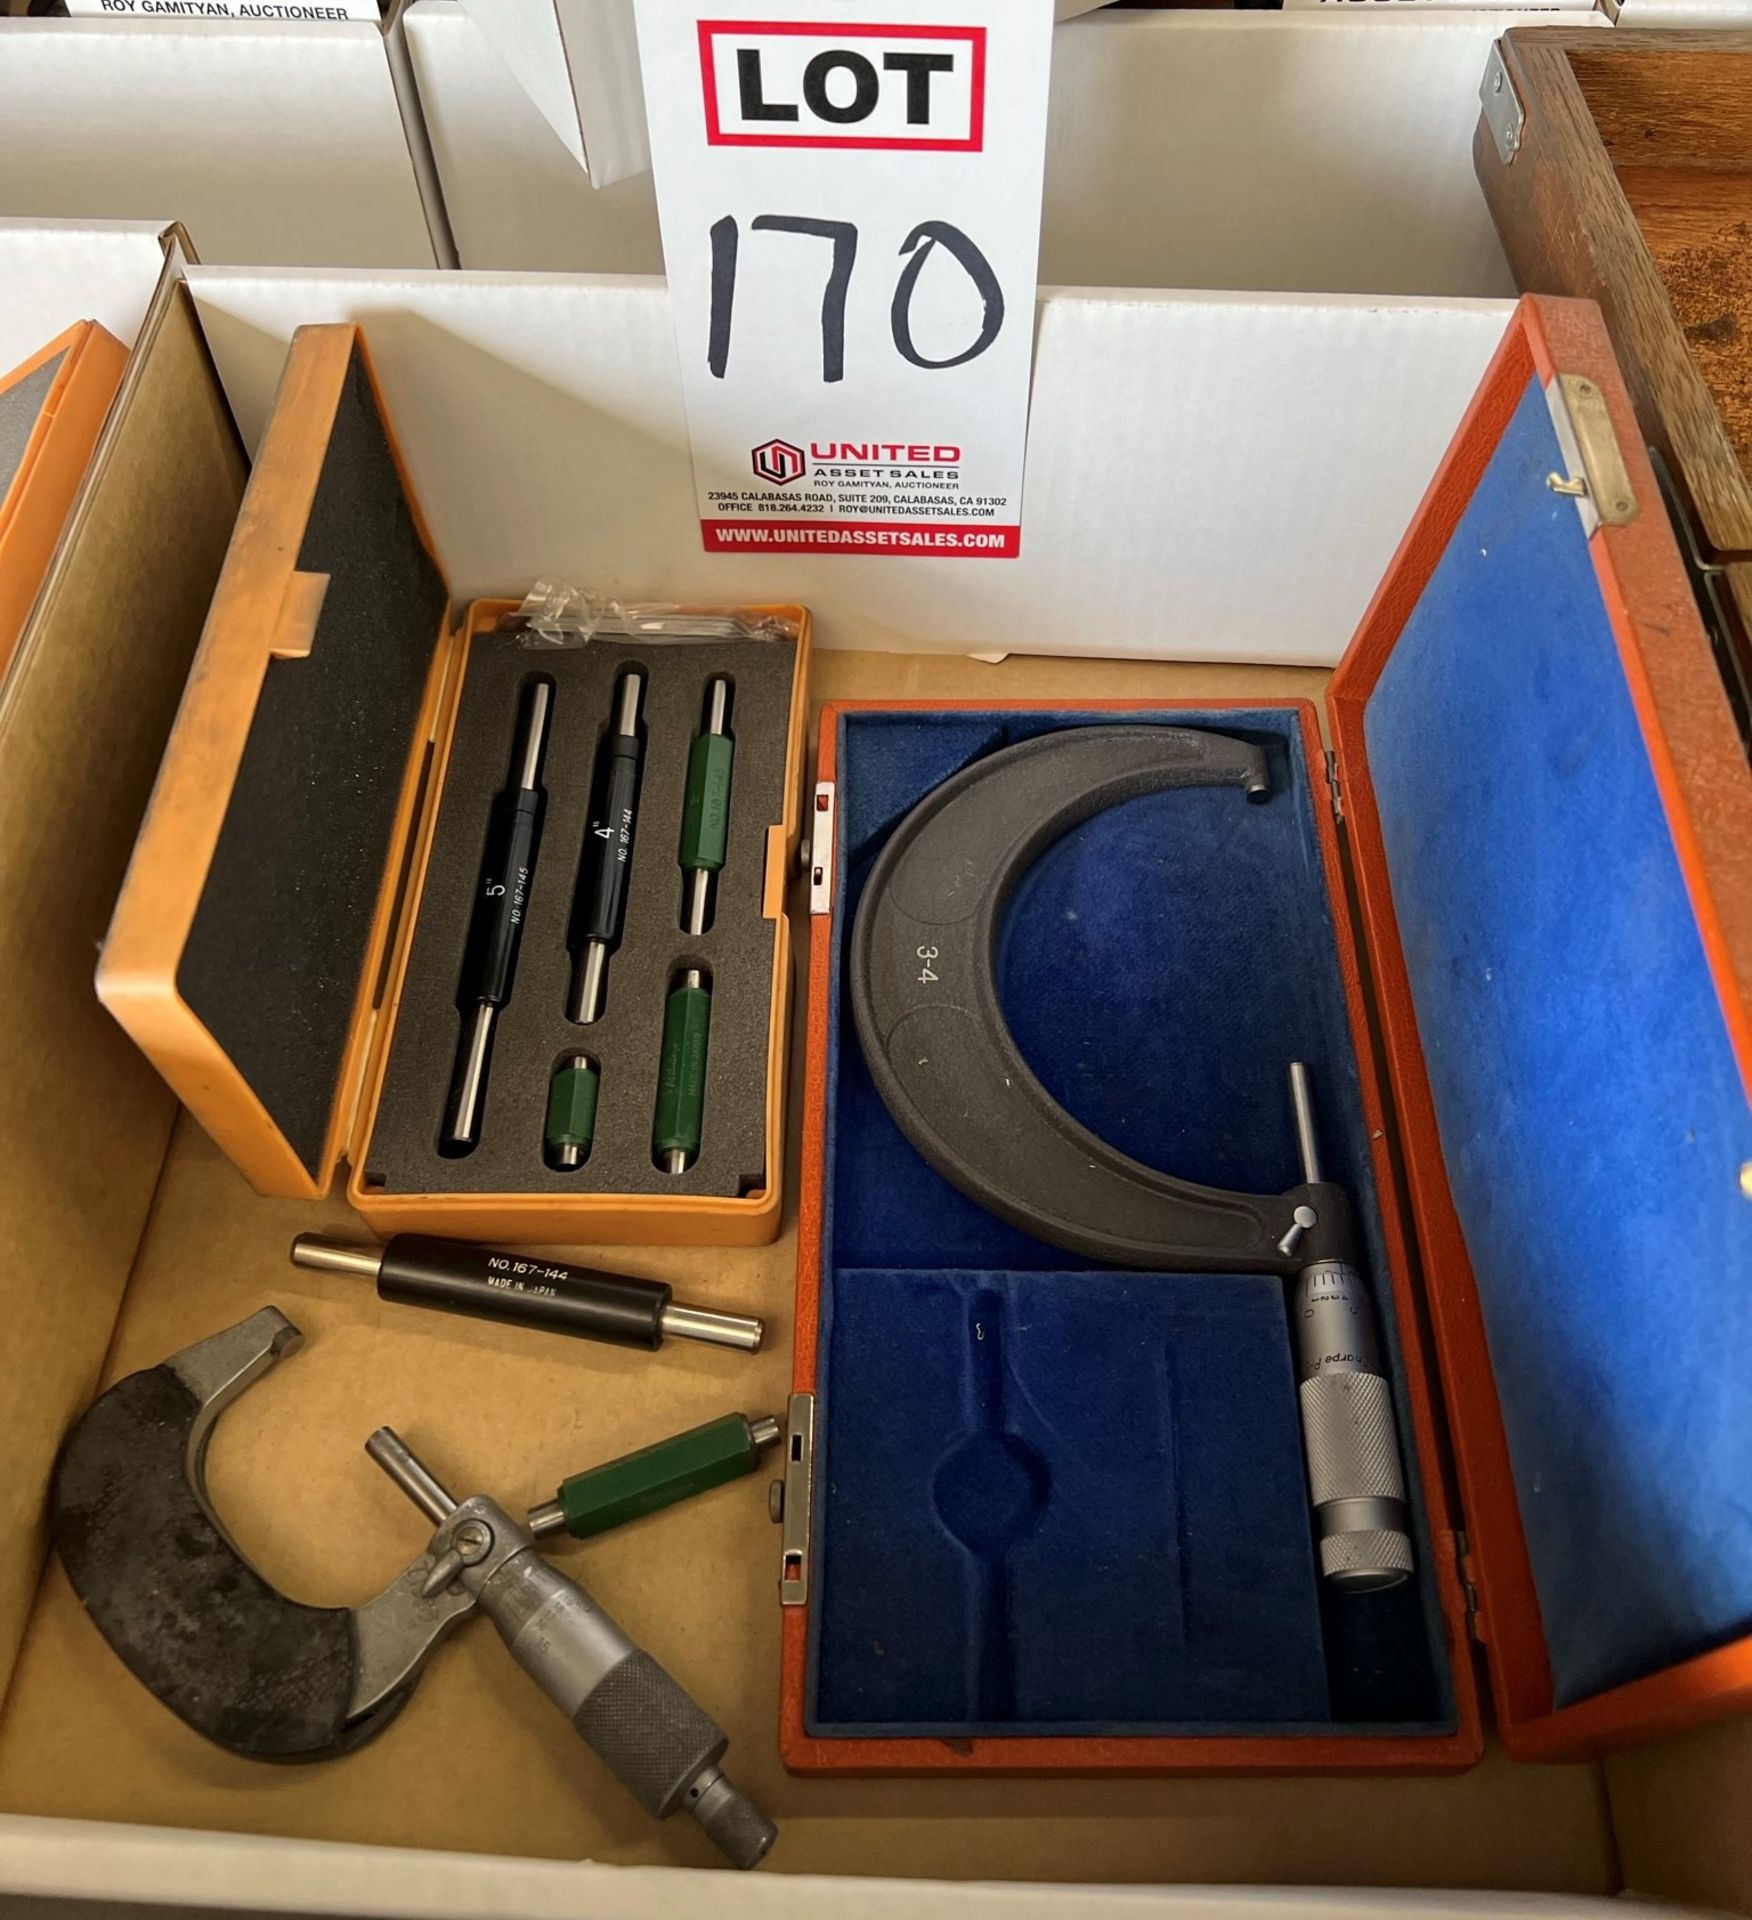 LOT - (2) MICROMETERS AND (1) MITUTOYO STANDARD SET